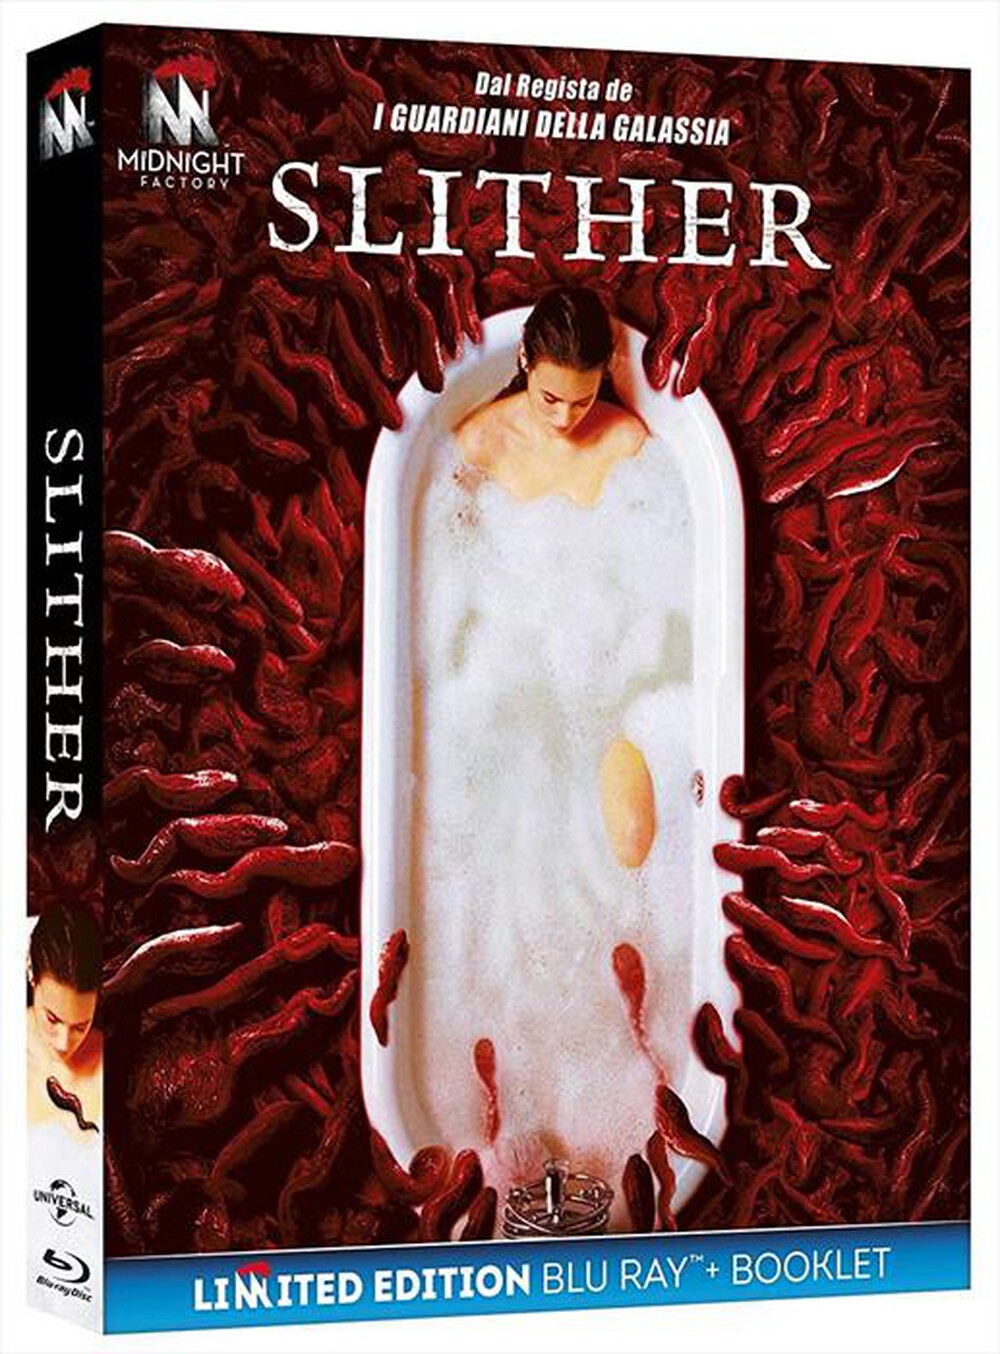 "Midnight Factory - Slither (Ltd) (Blu-Ray+Booklet)"